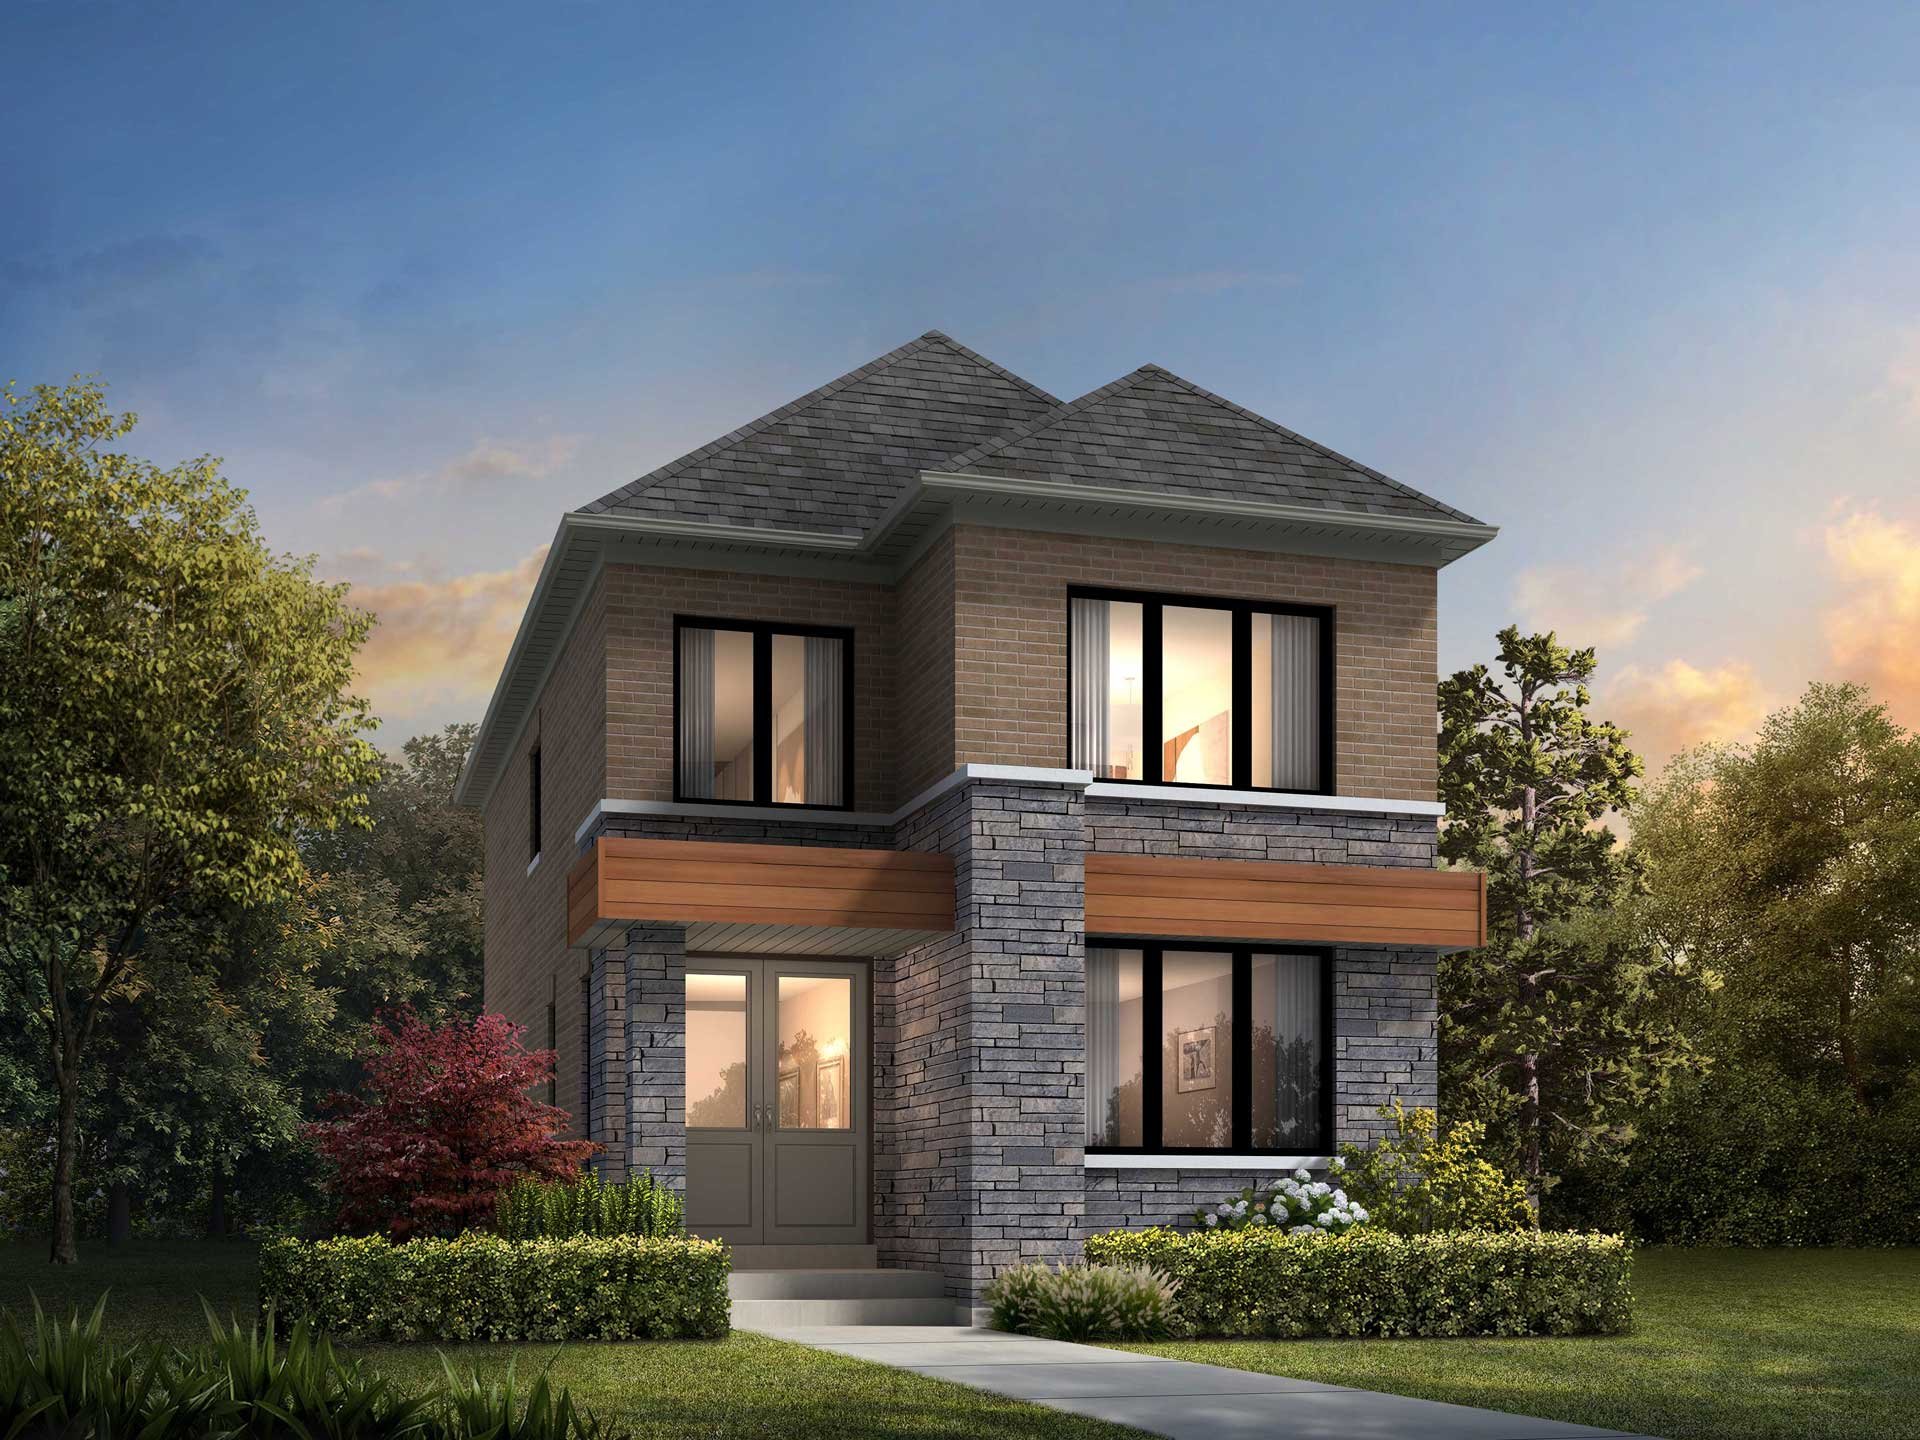 Rendering of Supreme model home in South Cornell